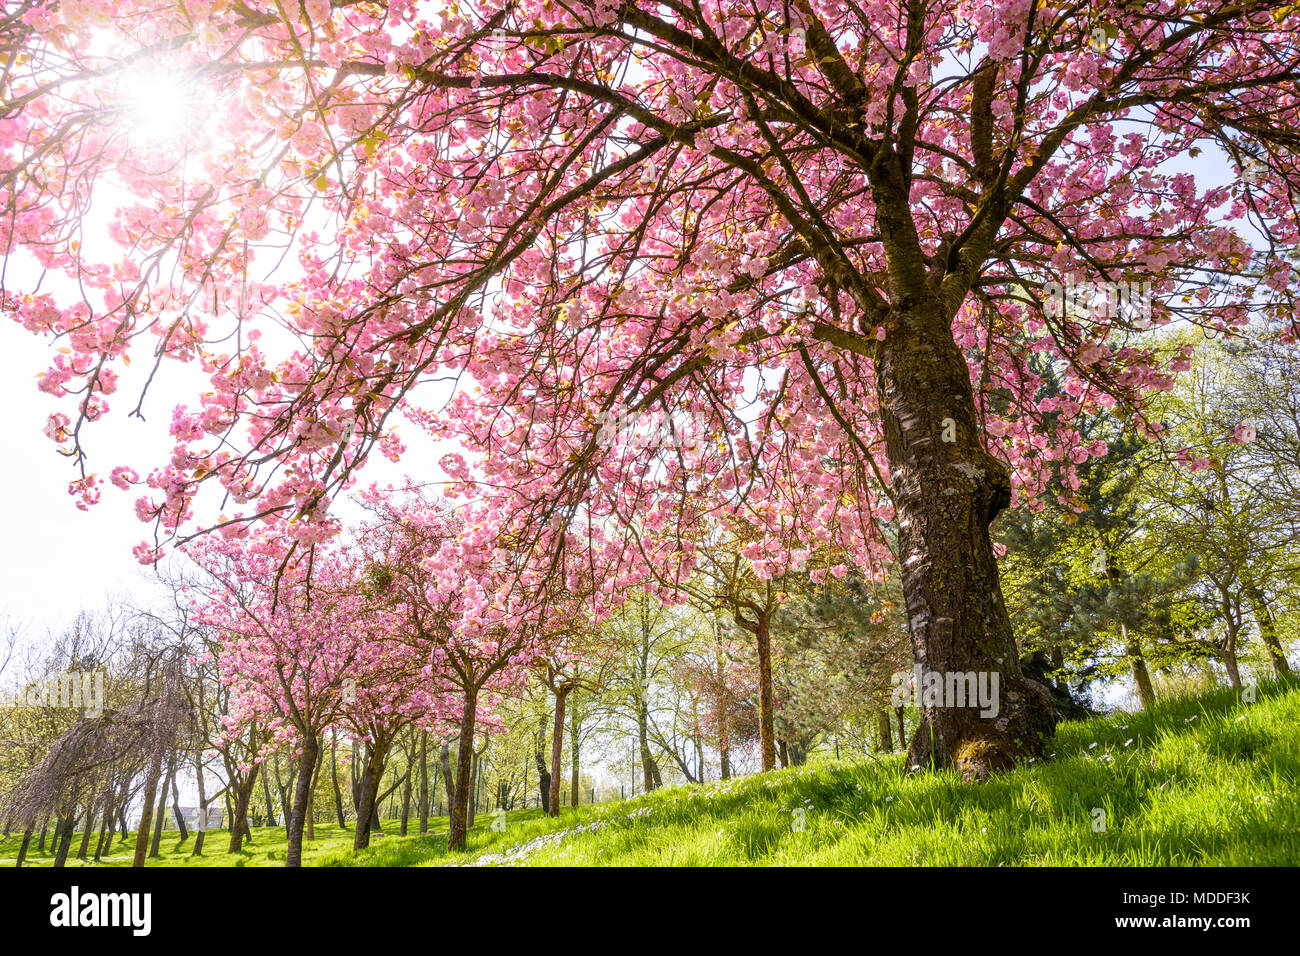 View from below of a blooming Japanese cherry tree with the sun rays passing through its falling branches laden down with clusters of pink flowers. Stock Photo